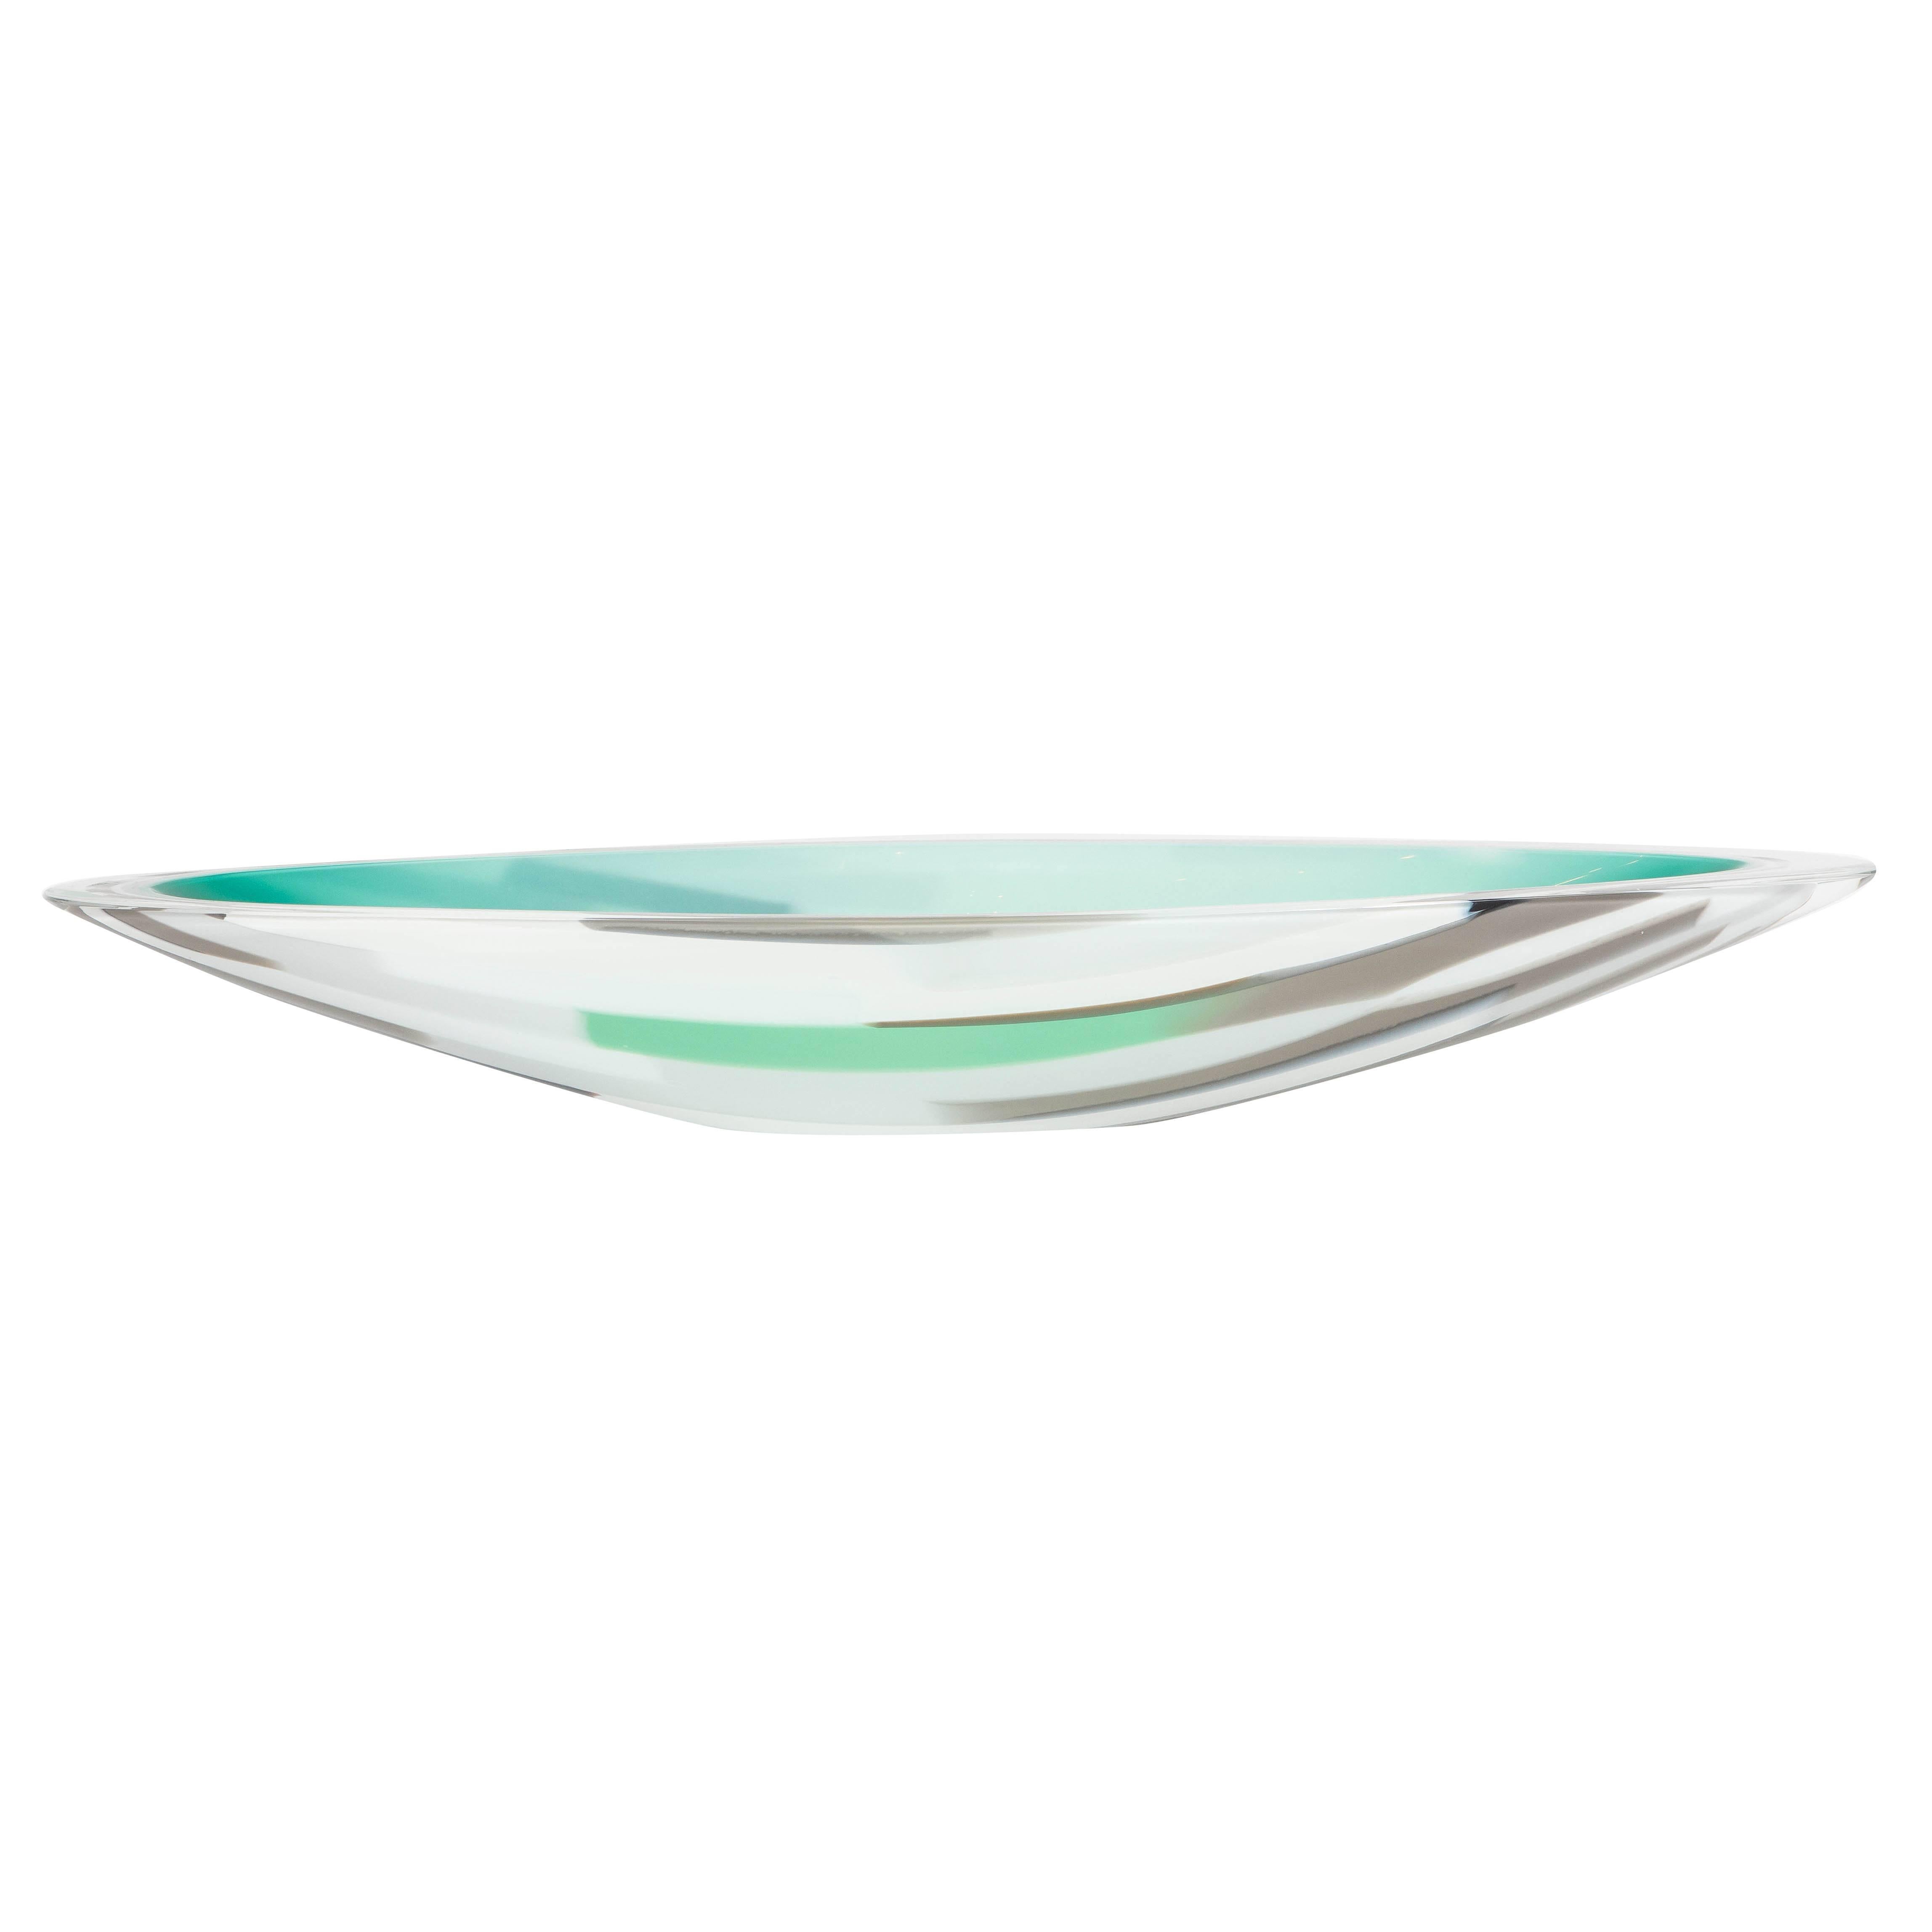 Modernist Murano Glass Limited Edition Bowl by Seguso Titled "Grass"